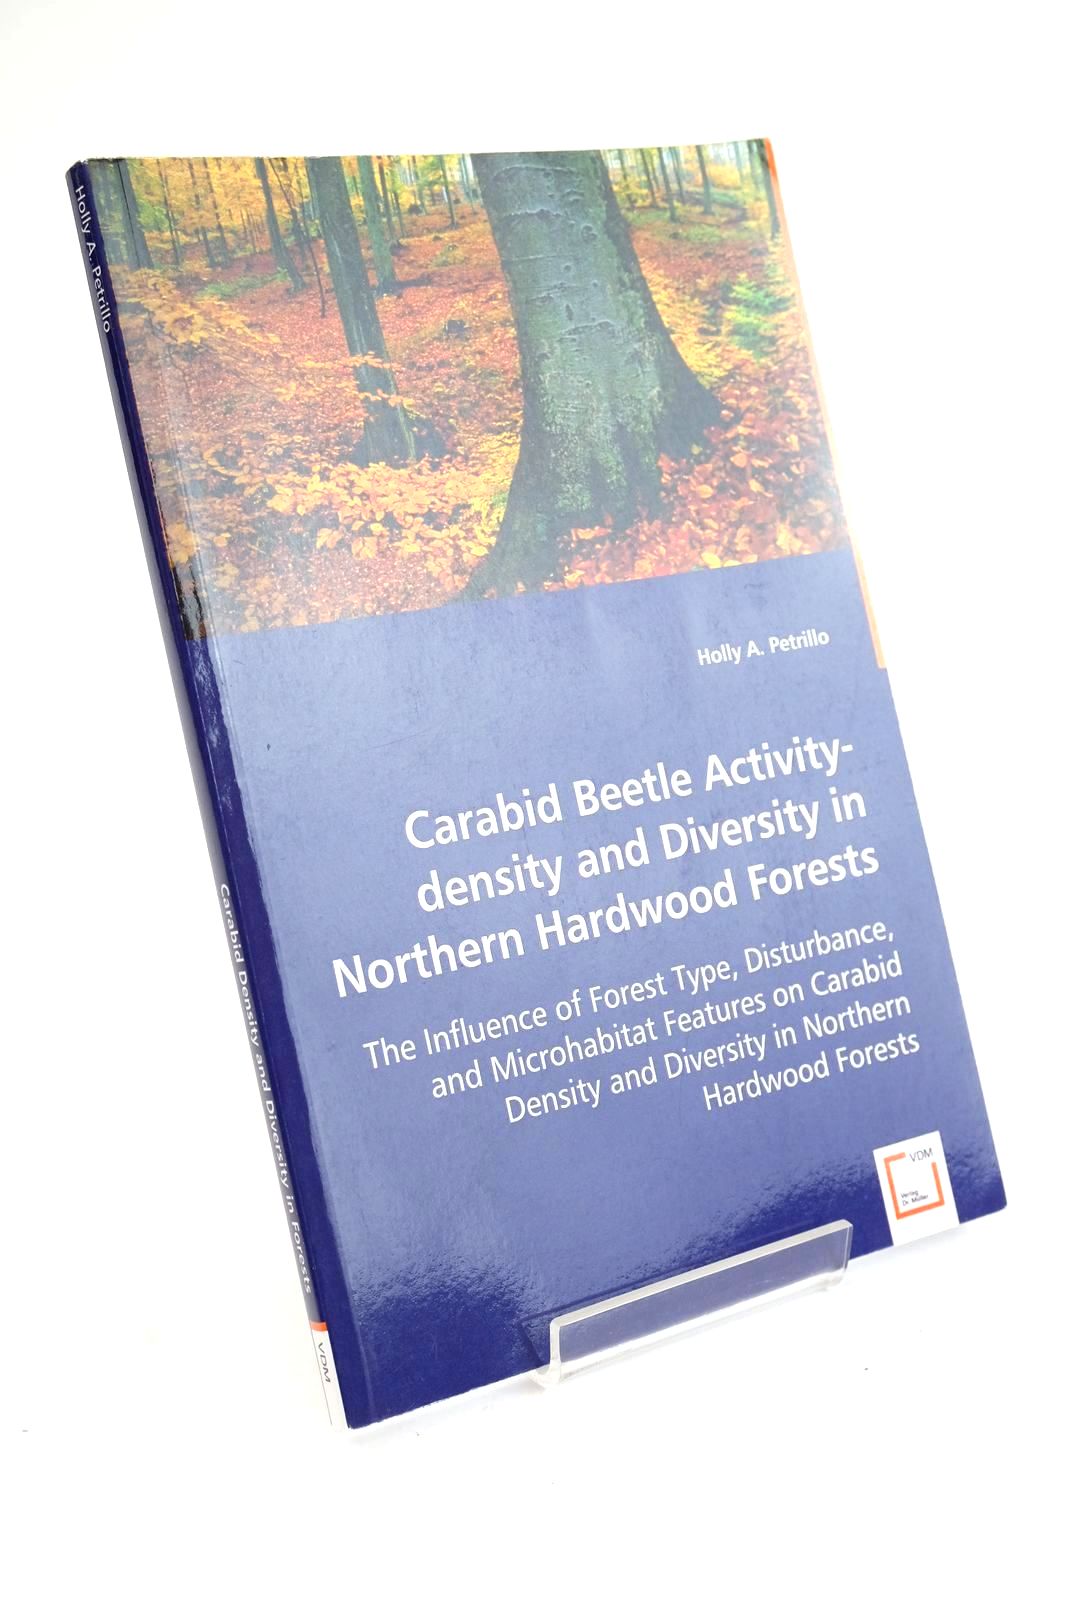 Photo of CARABID BEETLE ACTIVITY-DENSITY AND DIVERSITY IN NORTHERN HARDWOOD FORESTS- Stock Number: 1324011